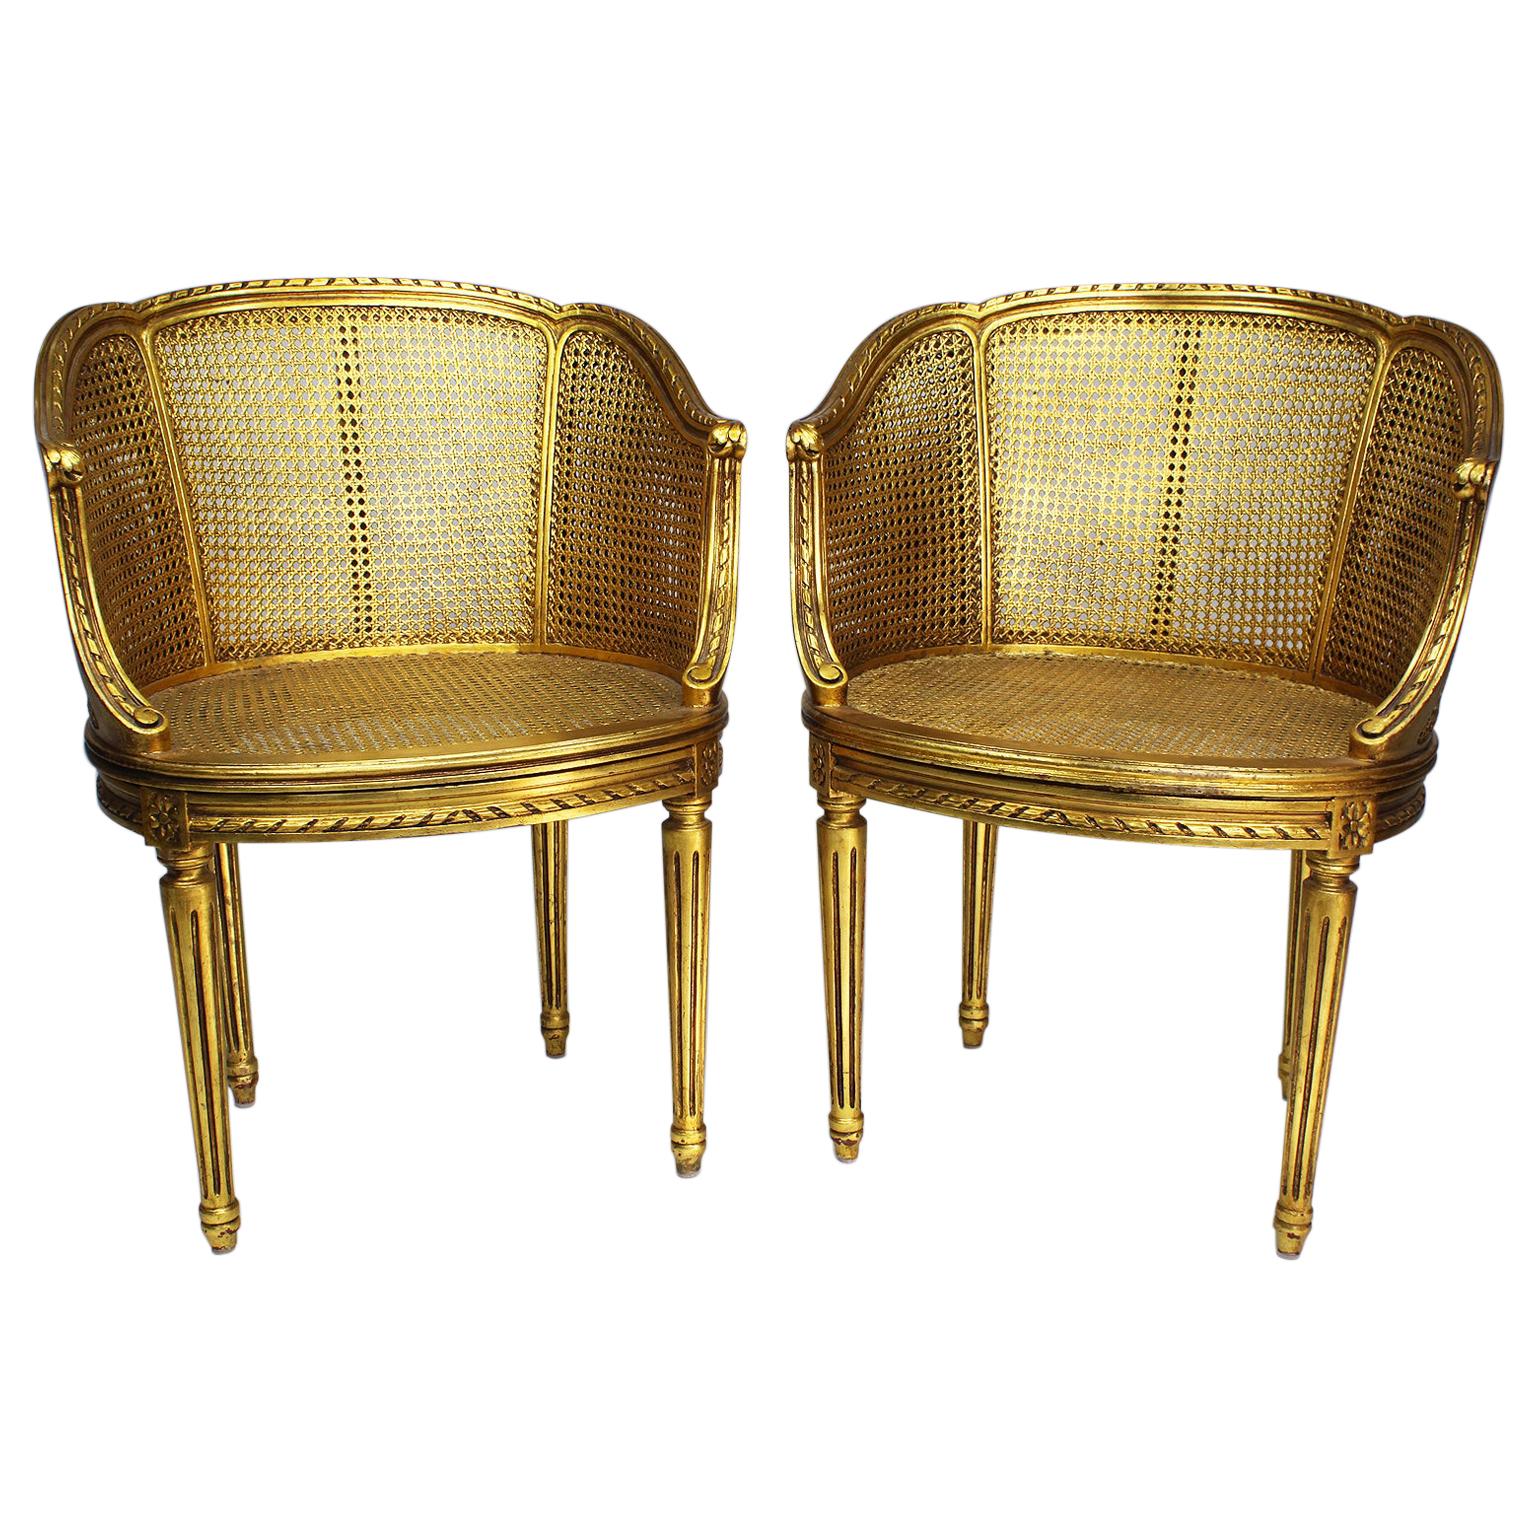 Pair of French Louis XVI Style Giltwood Carved and Cane Fauteuils Armchairs